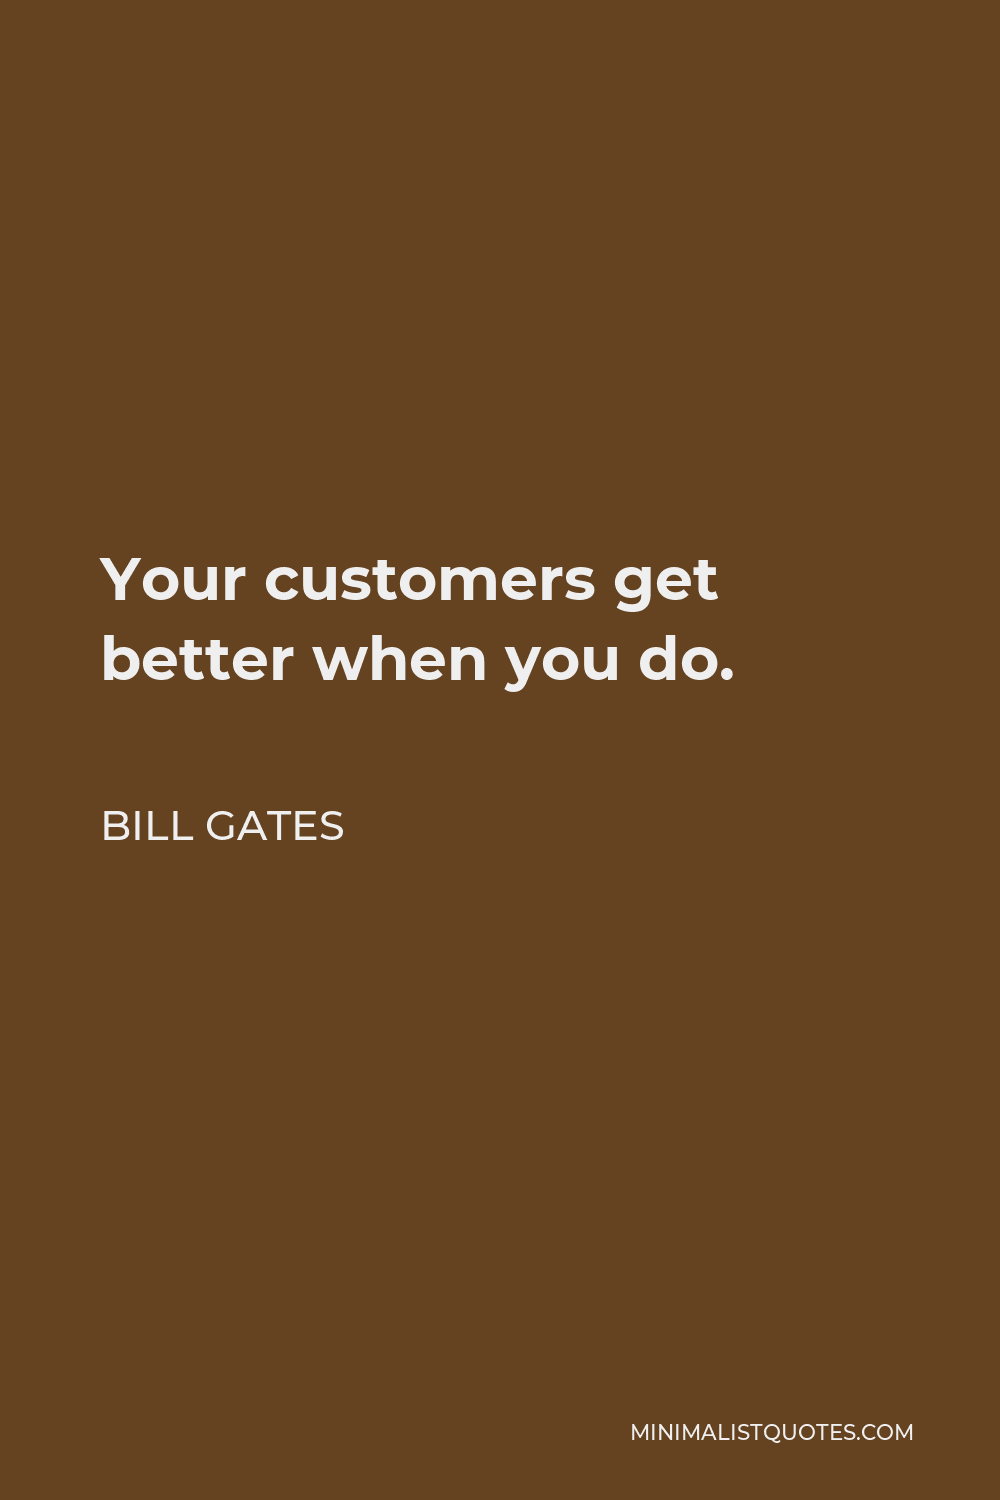 Bill Gates Quote - Your customers get better when you do.